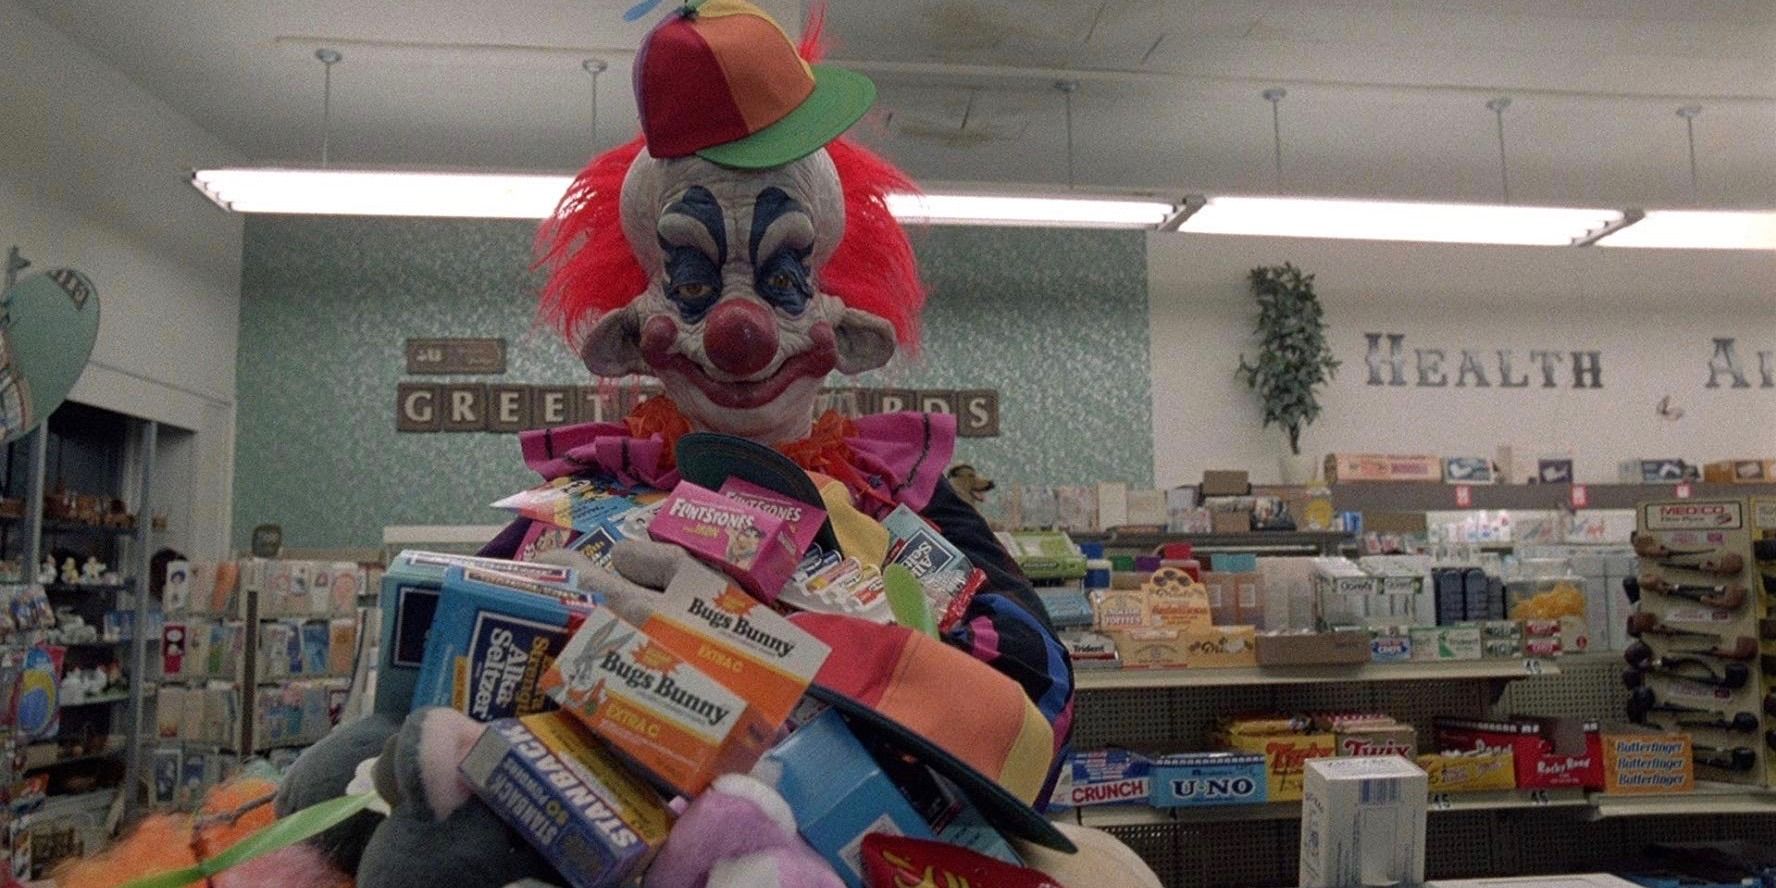 Klown-in-Store-in-Killer-Klowns-From-Outer-Space